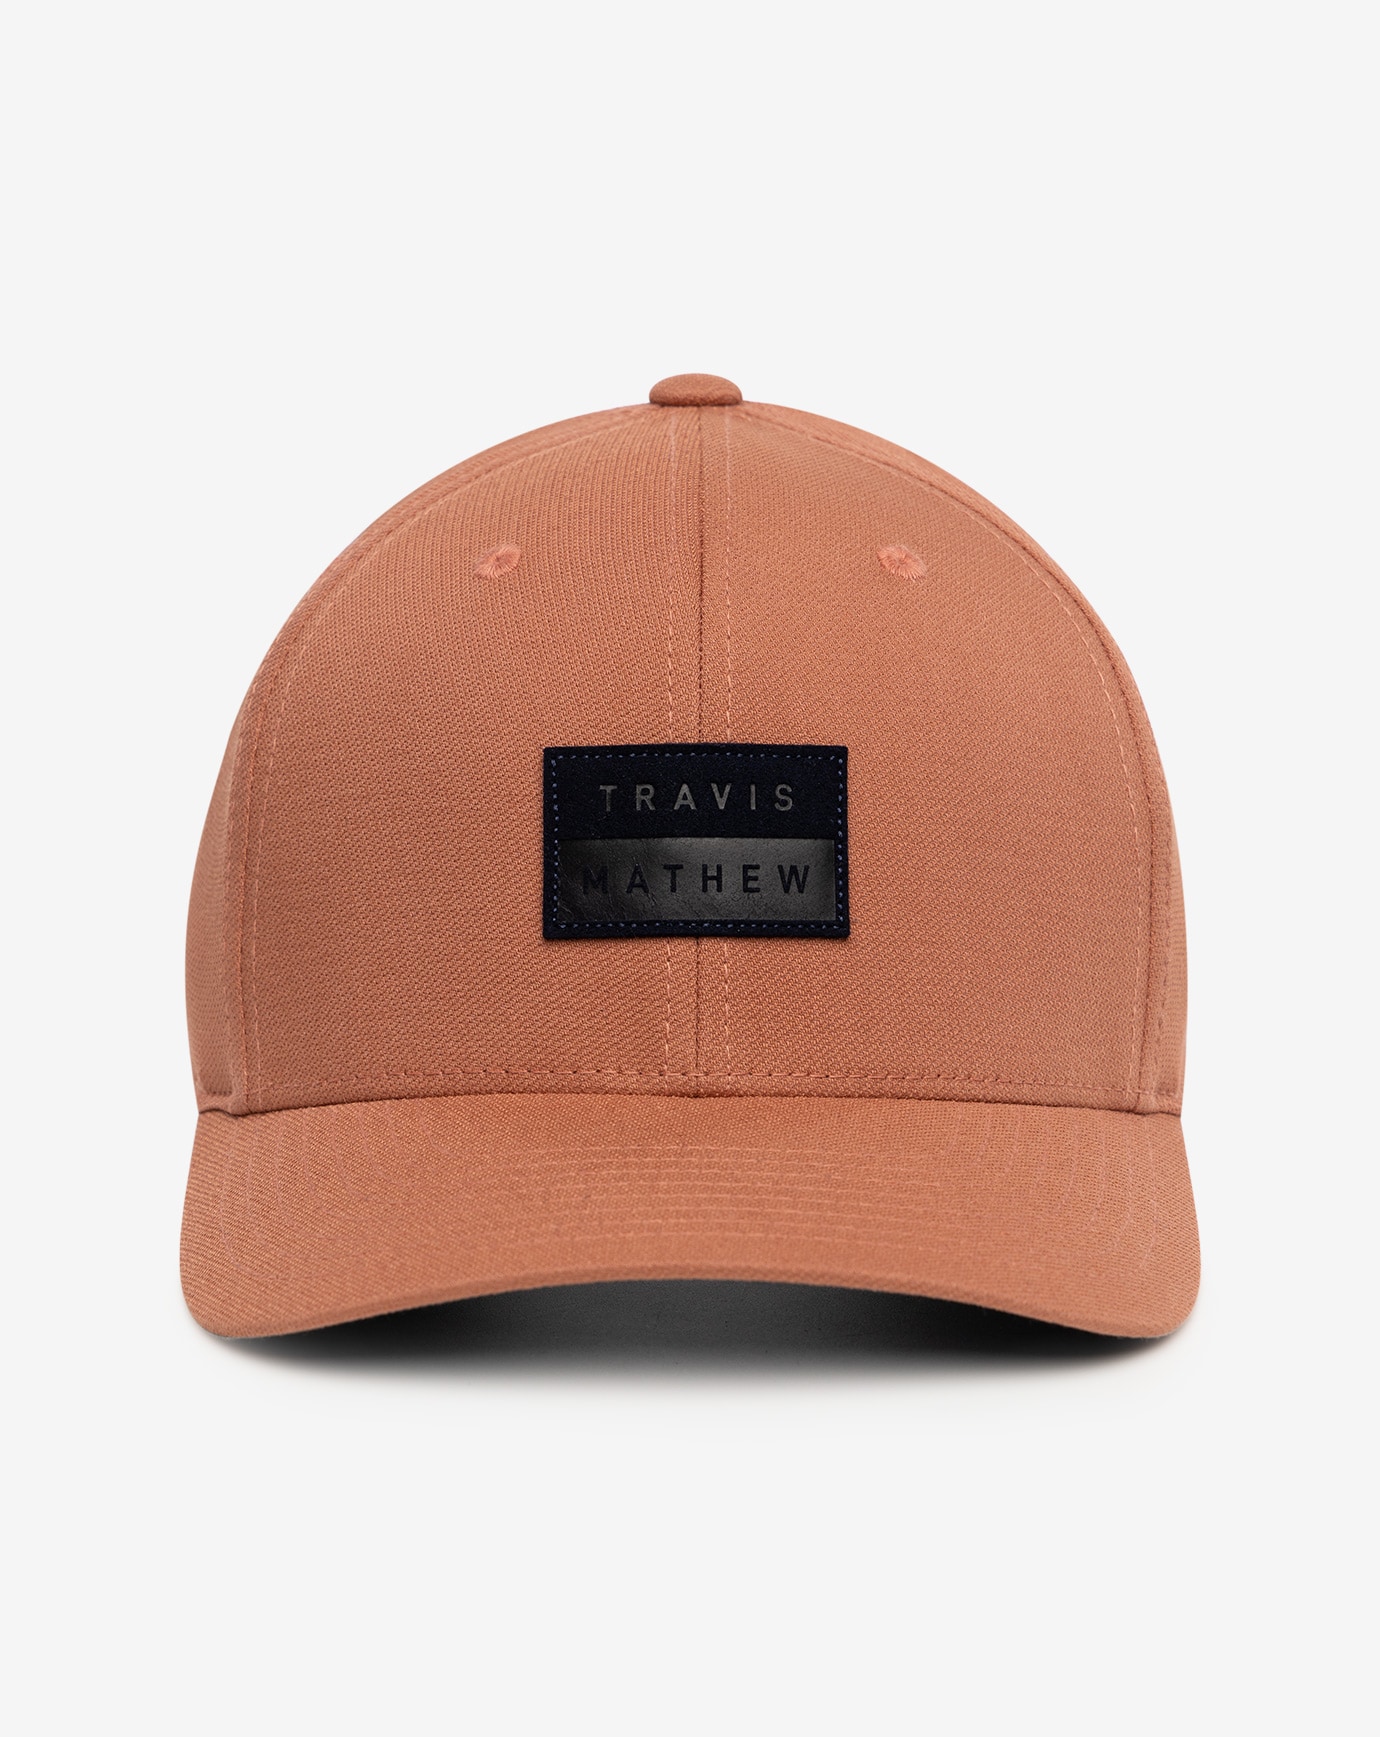 Related Product - CHURRO TRUCK SNAPBACK HAT